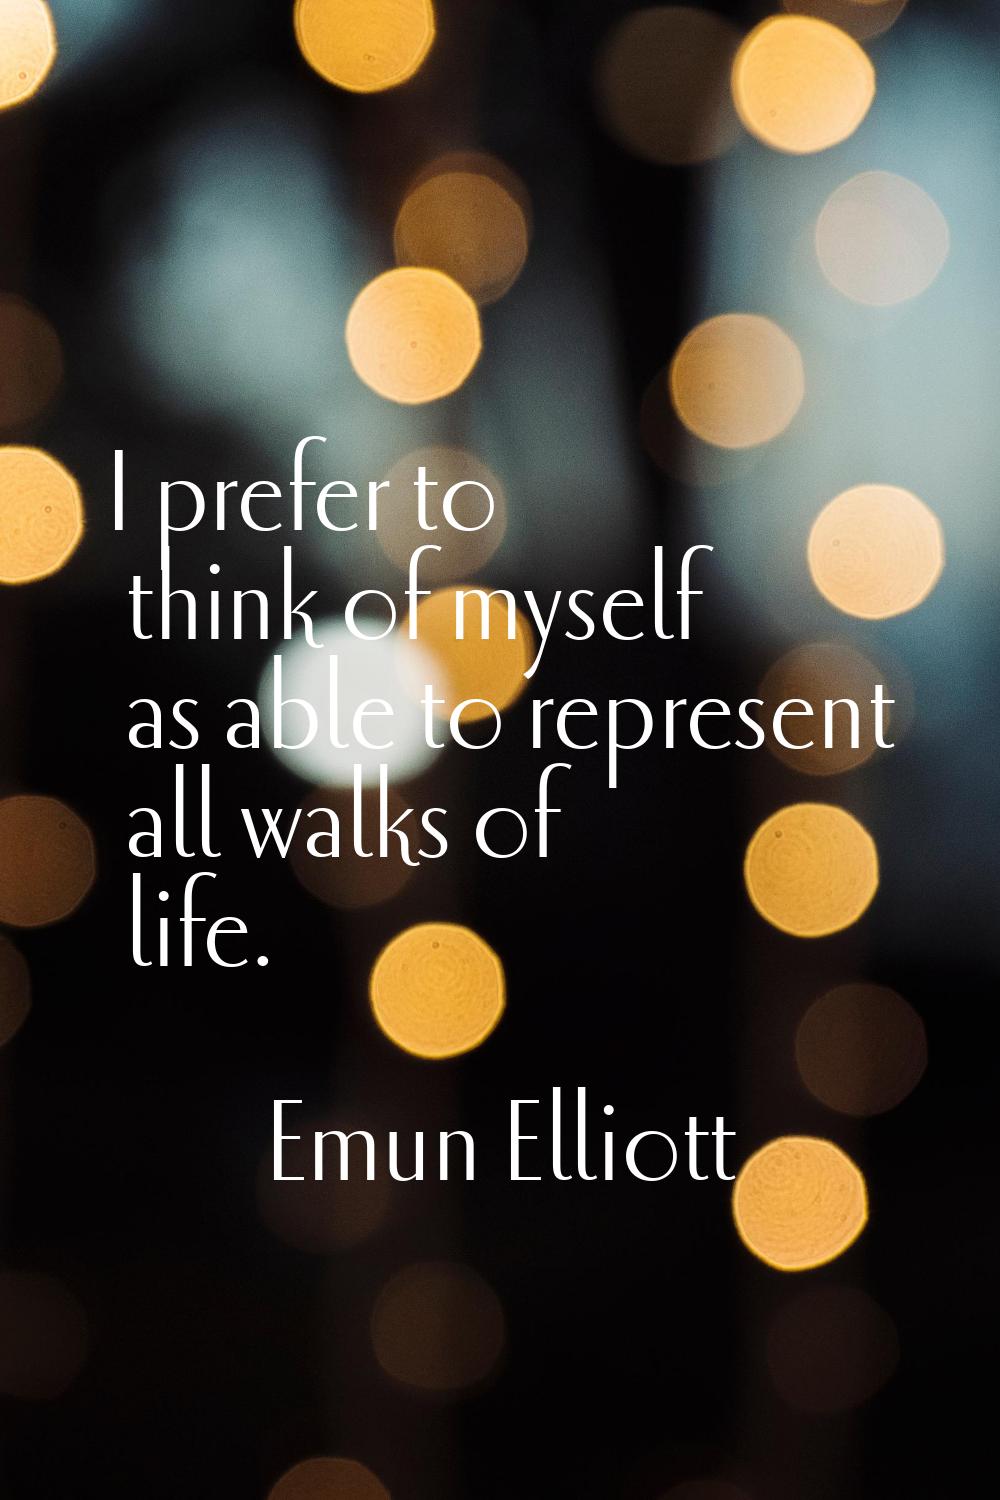 I prefer to think of myself as able to represent all walks of life.